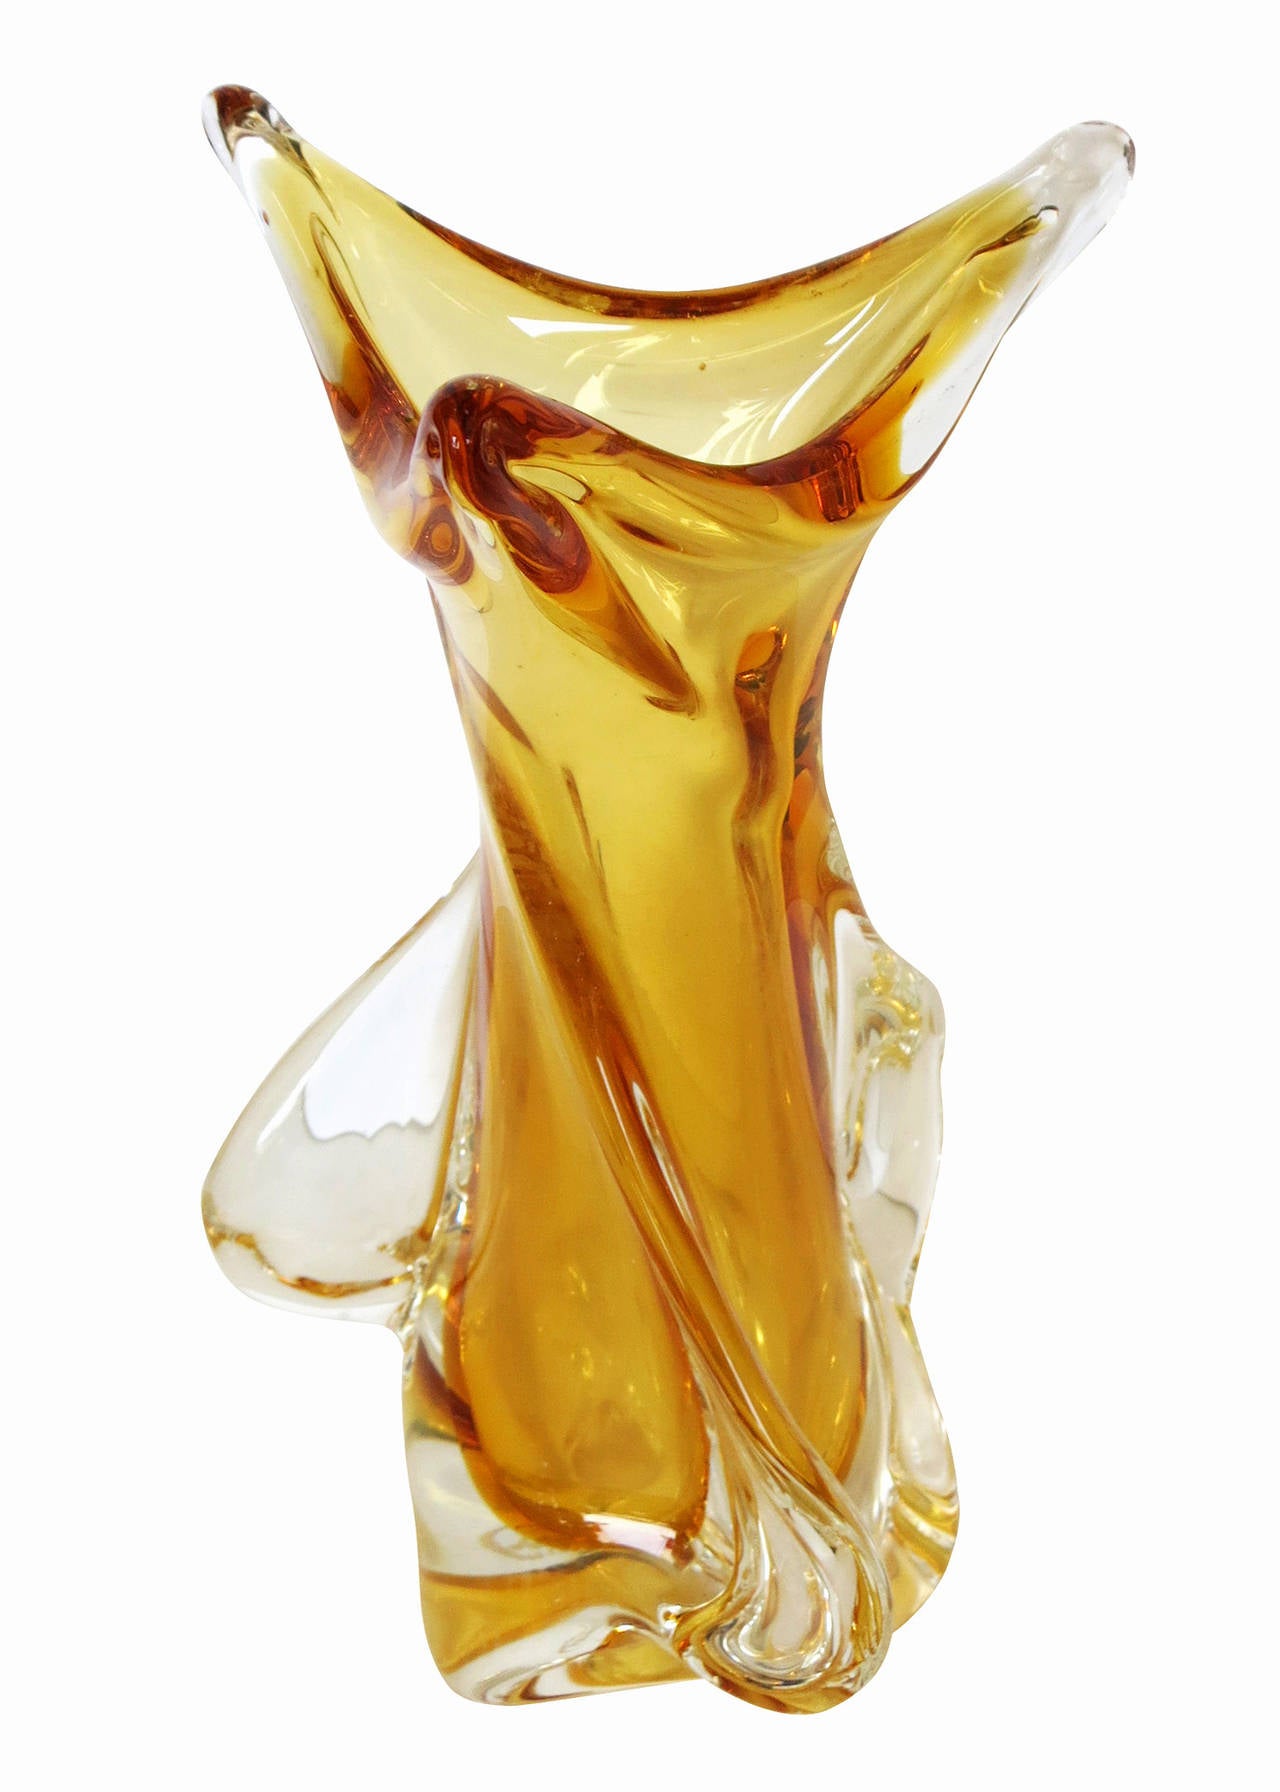 Dear Customer, I have marked many of my items for the 1stdibs Saturday Sale, take a look and save from 20% to 50% now. Take a look at all of these items; https://goo.gl/hNLz4x

This piece is a free form art glass vase by Chalet, featuring a honey